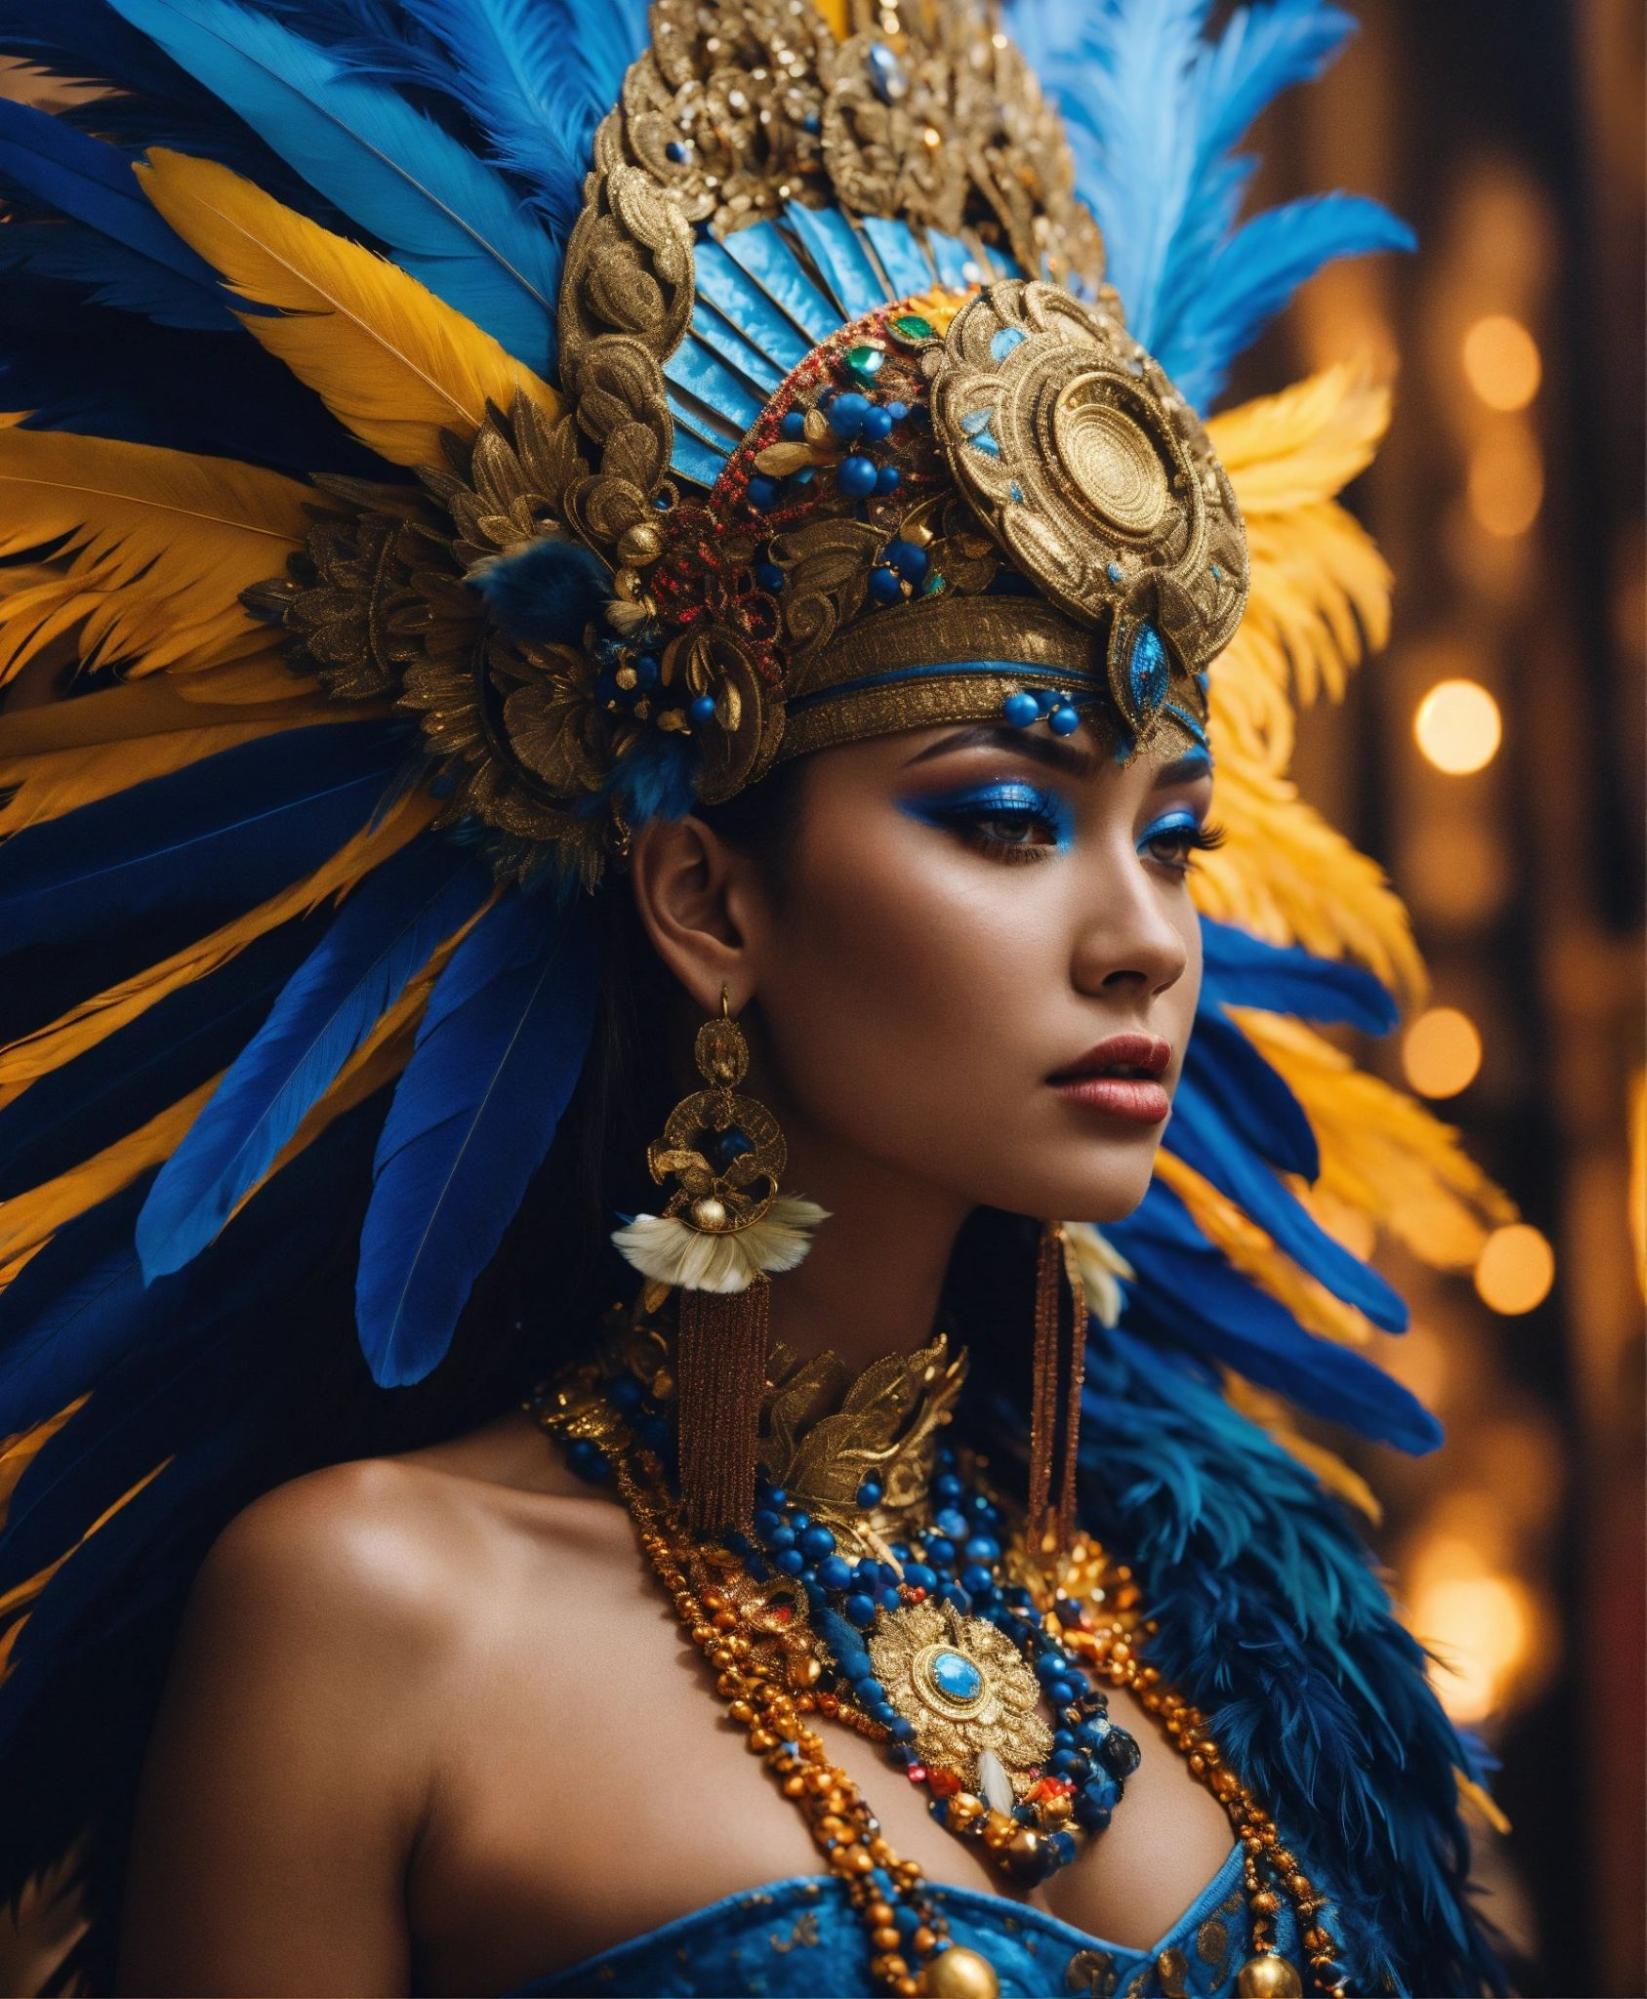  Mayan queen in blue and gold